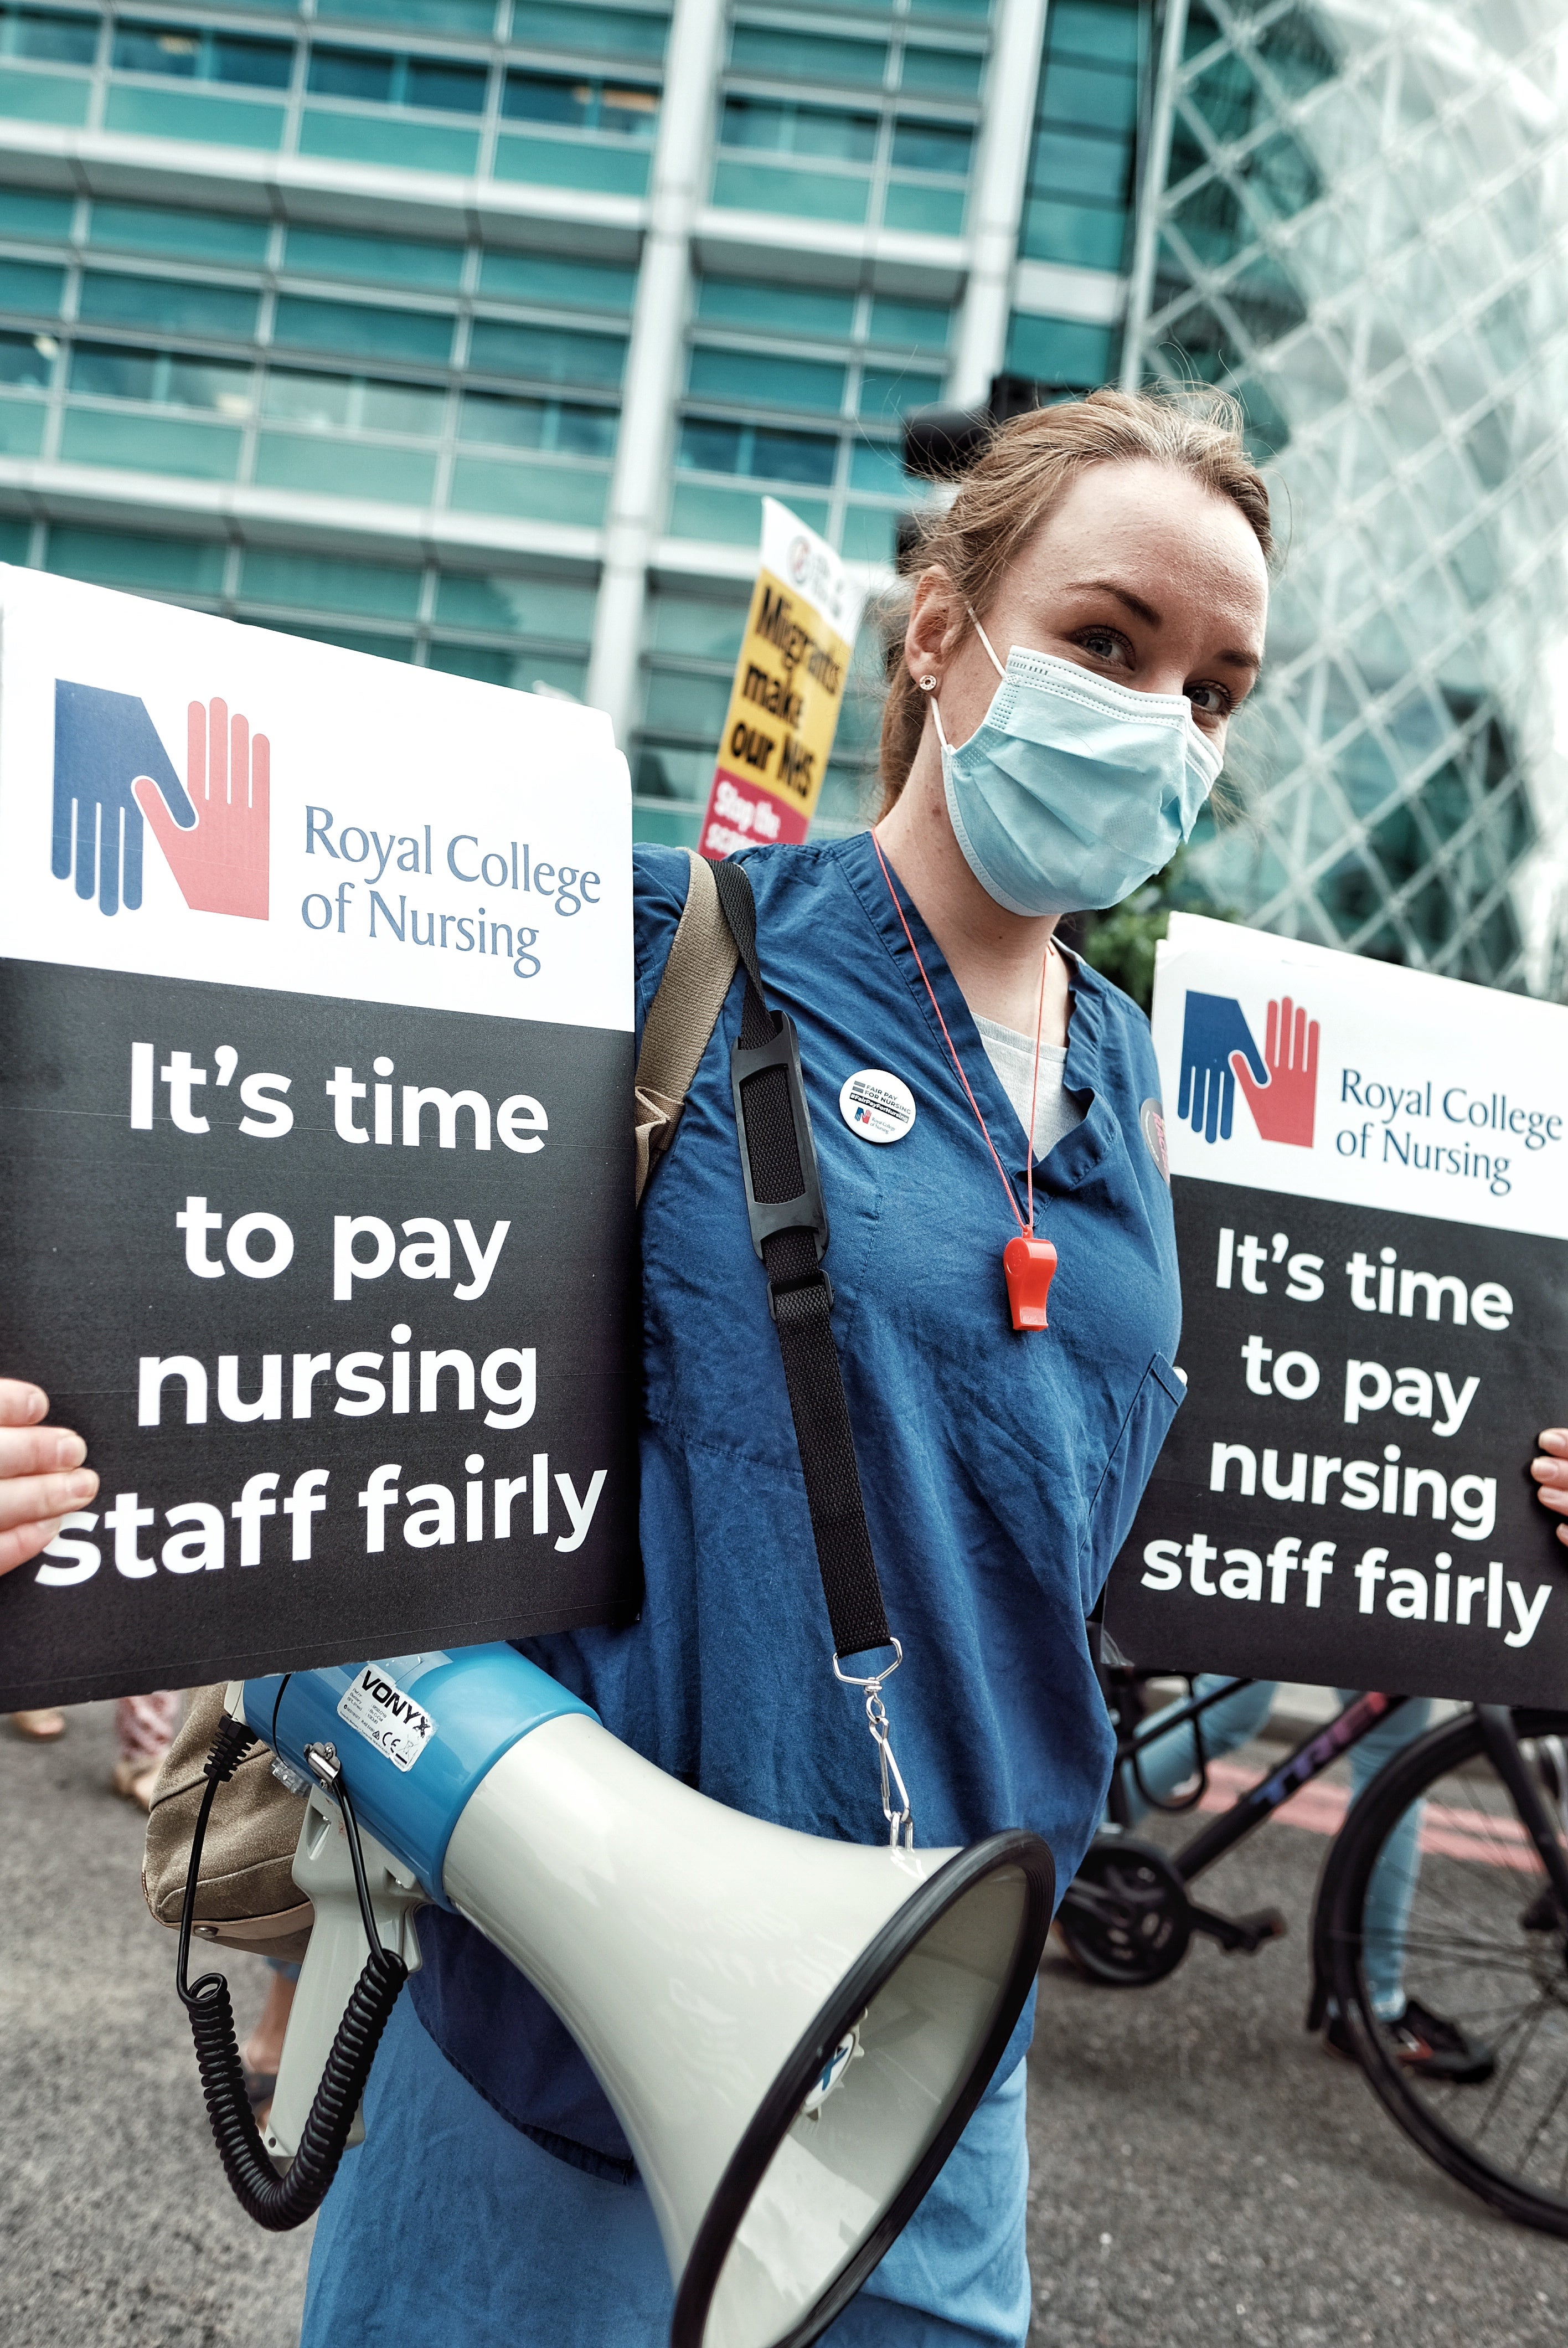 Action took place across the UK to demand patient safety and an end to the privatisation of the NHS